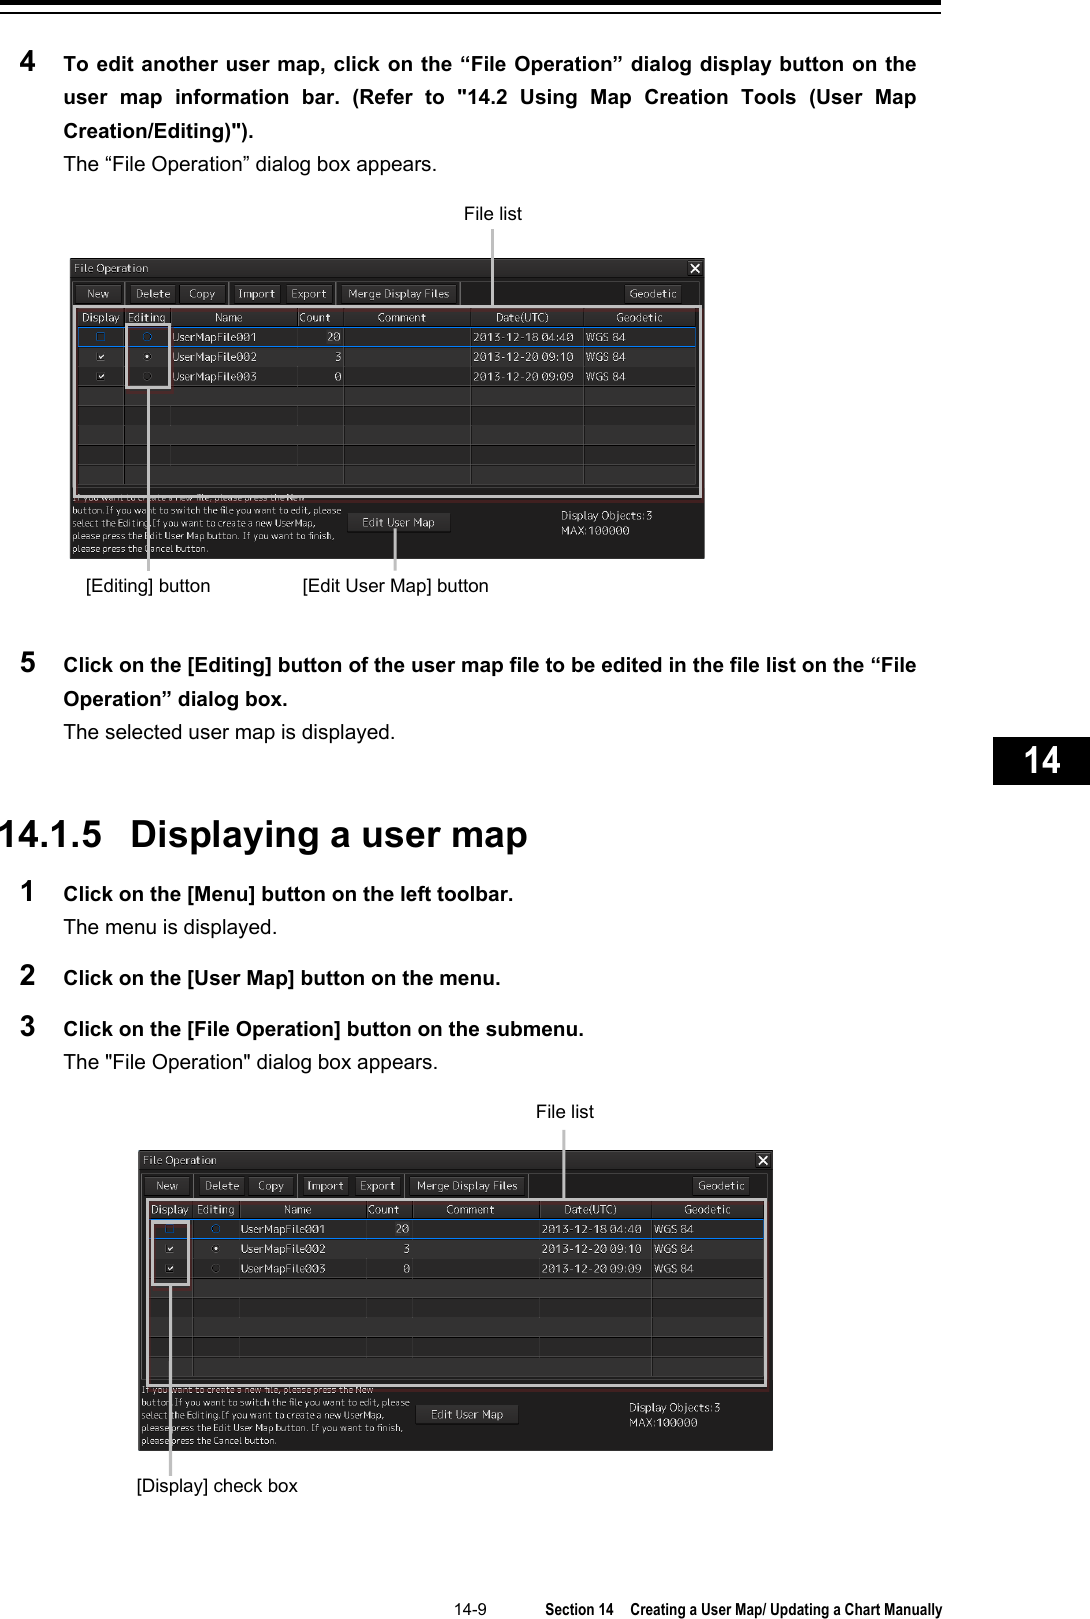   14-9  Section 14  Creating a User Map/ Updating a Chart Manually    1  2  3  4  5  6  7  8  9  10  11  12  13  14  15  16  17  18  19  20  21  22  23  24  25  26  27      4  To edit another user map, click on the “File Operation” dialog display button on the user map information bar. (Refer to &quot;14.2 Using Map Creation Tools (User Map Creation/Editing)&quot;). The “File Operation” dialog box appears.  5  Click on the [Editing] button of the user map file to be edited in the file list on the “File Operation” dialog box. The selected user map is displayed.   14.1.5 Displaying a user map 1  Click on the [Menu] button on the left toolbar. The menu is displayed. 2  Click on the [User Map] button on the menu. 3  Click on the [File Operation] button on the submenu. The &quot;File Operation&quot; dialog box appears.    [Edit User Map] button [Editing] button File list [Display] check box File list 